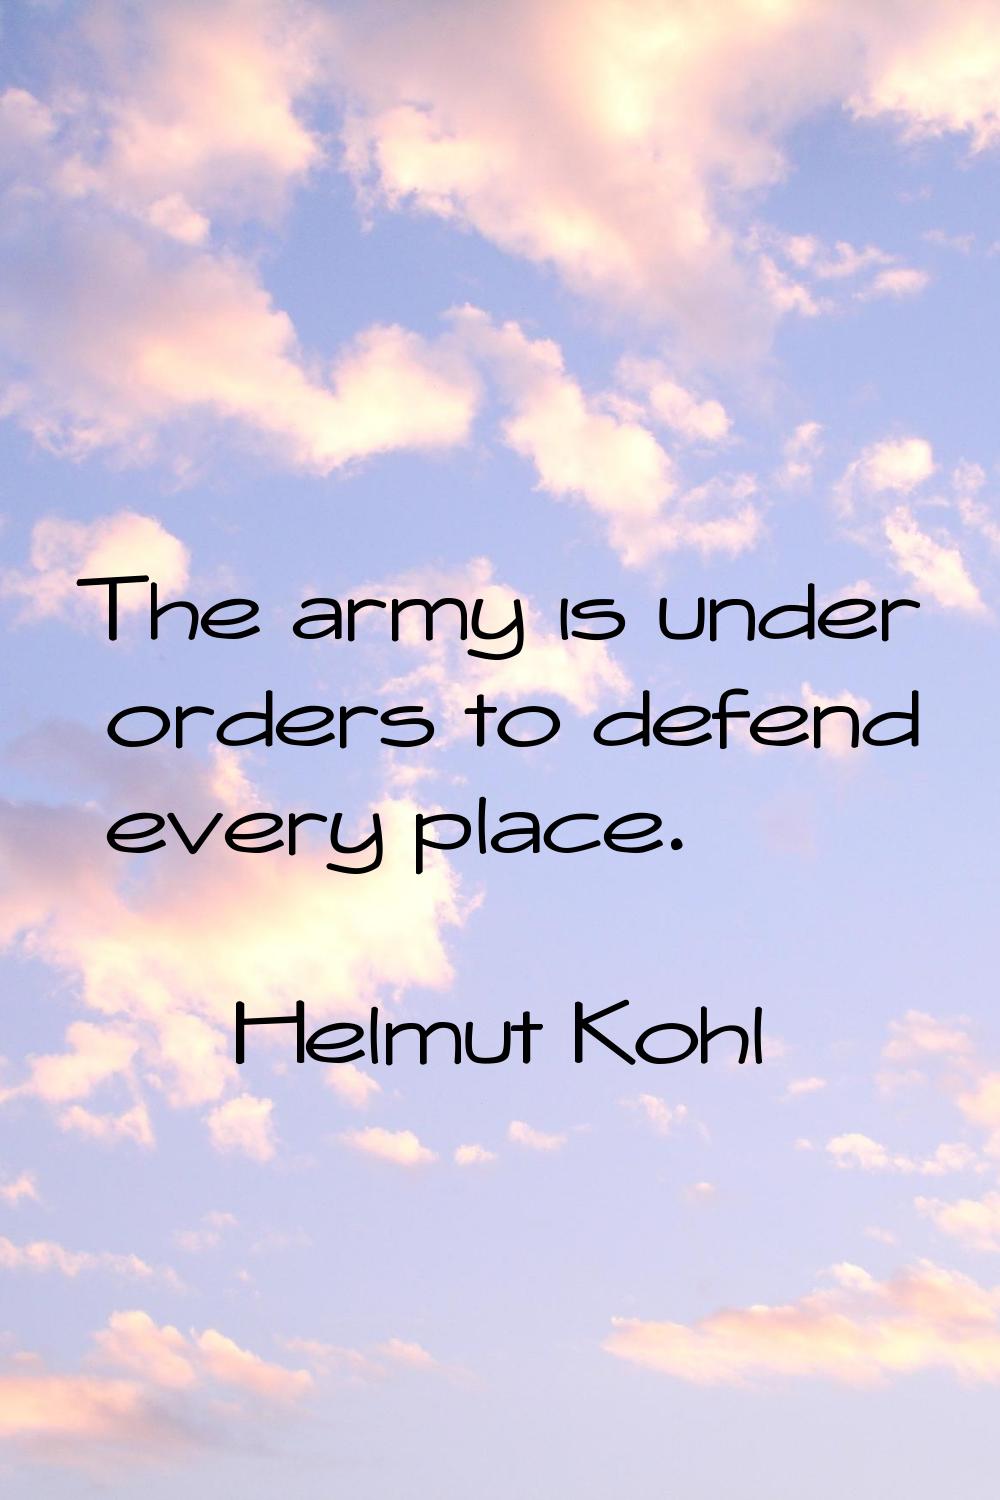 The army is under orders to defend every place.